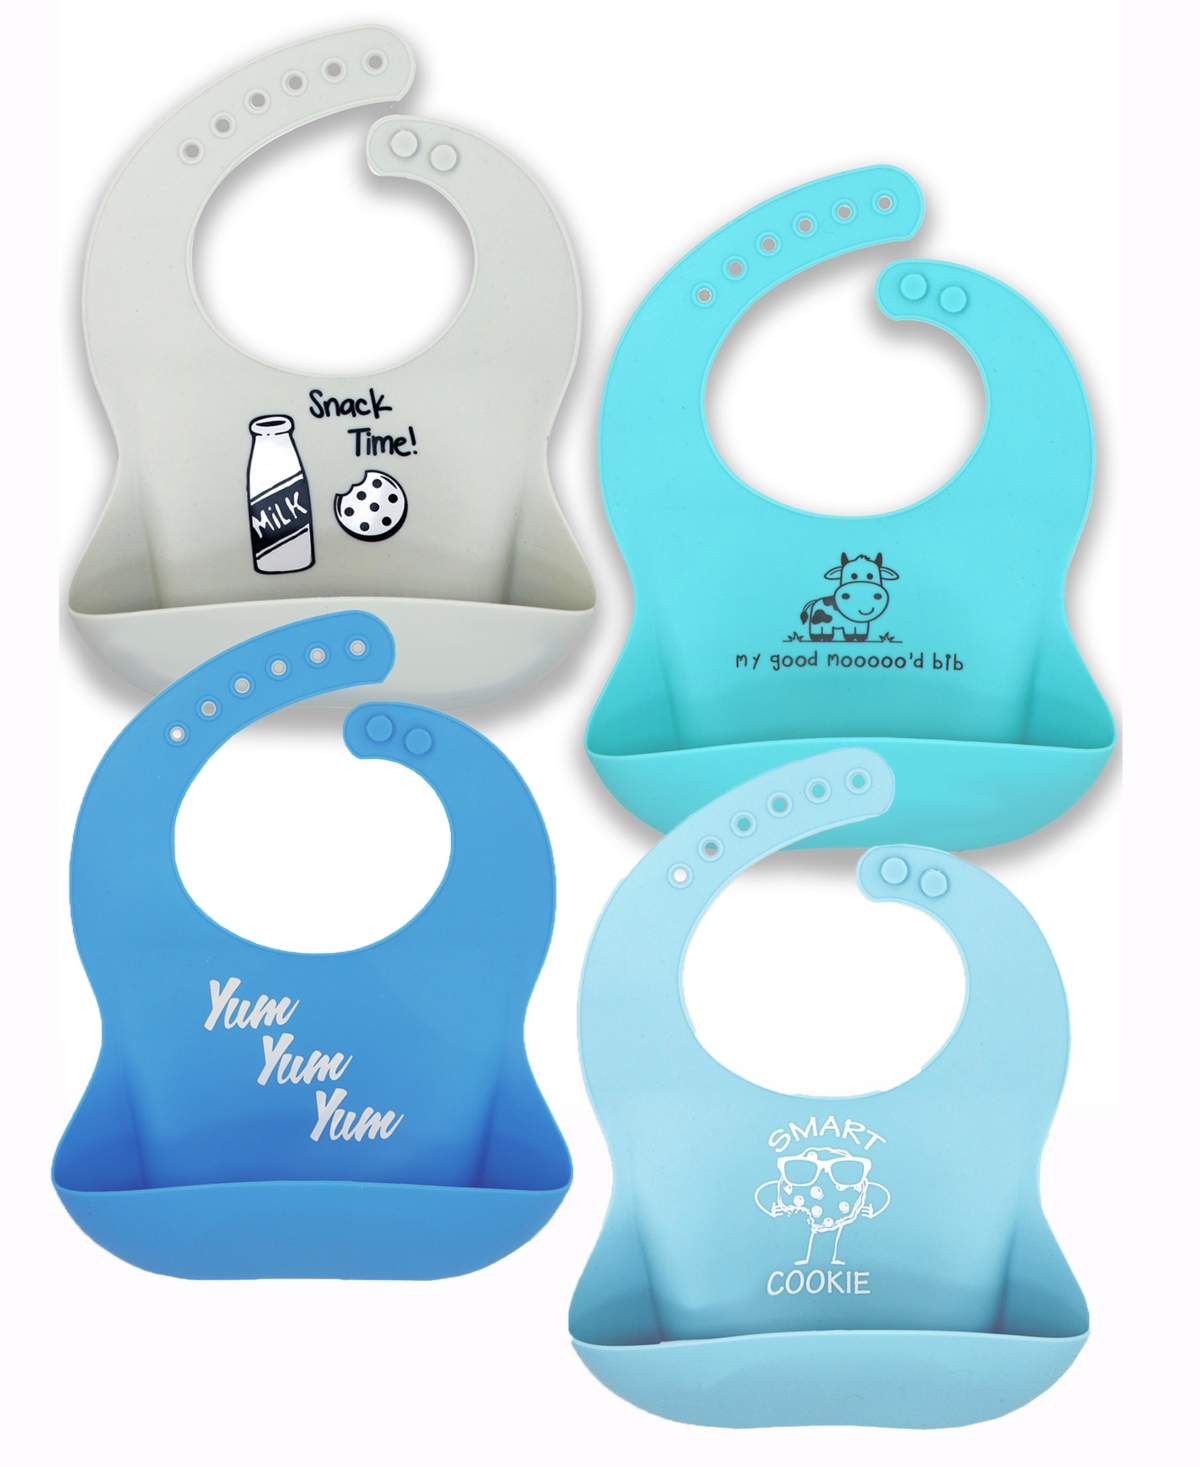 Tendertyme Baby 10 Decorative Clothes Hangers - Blue